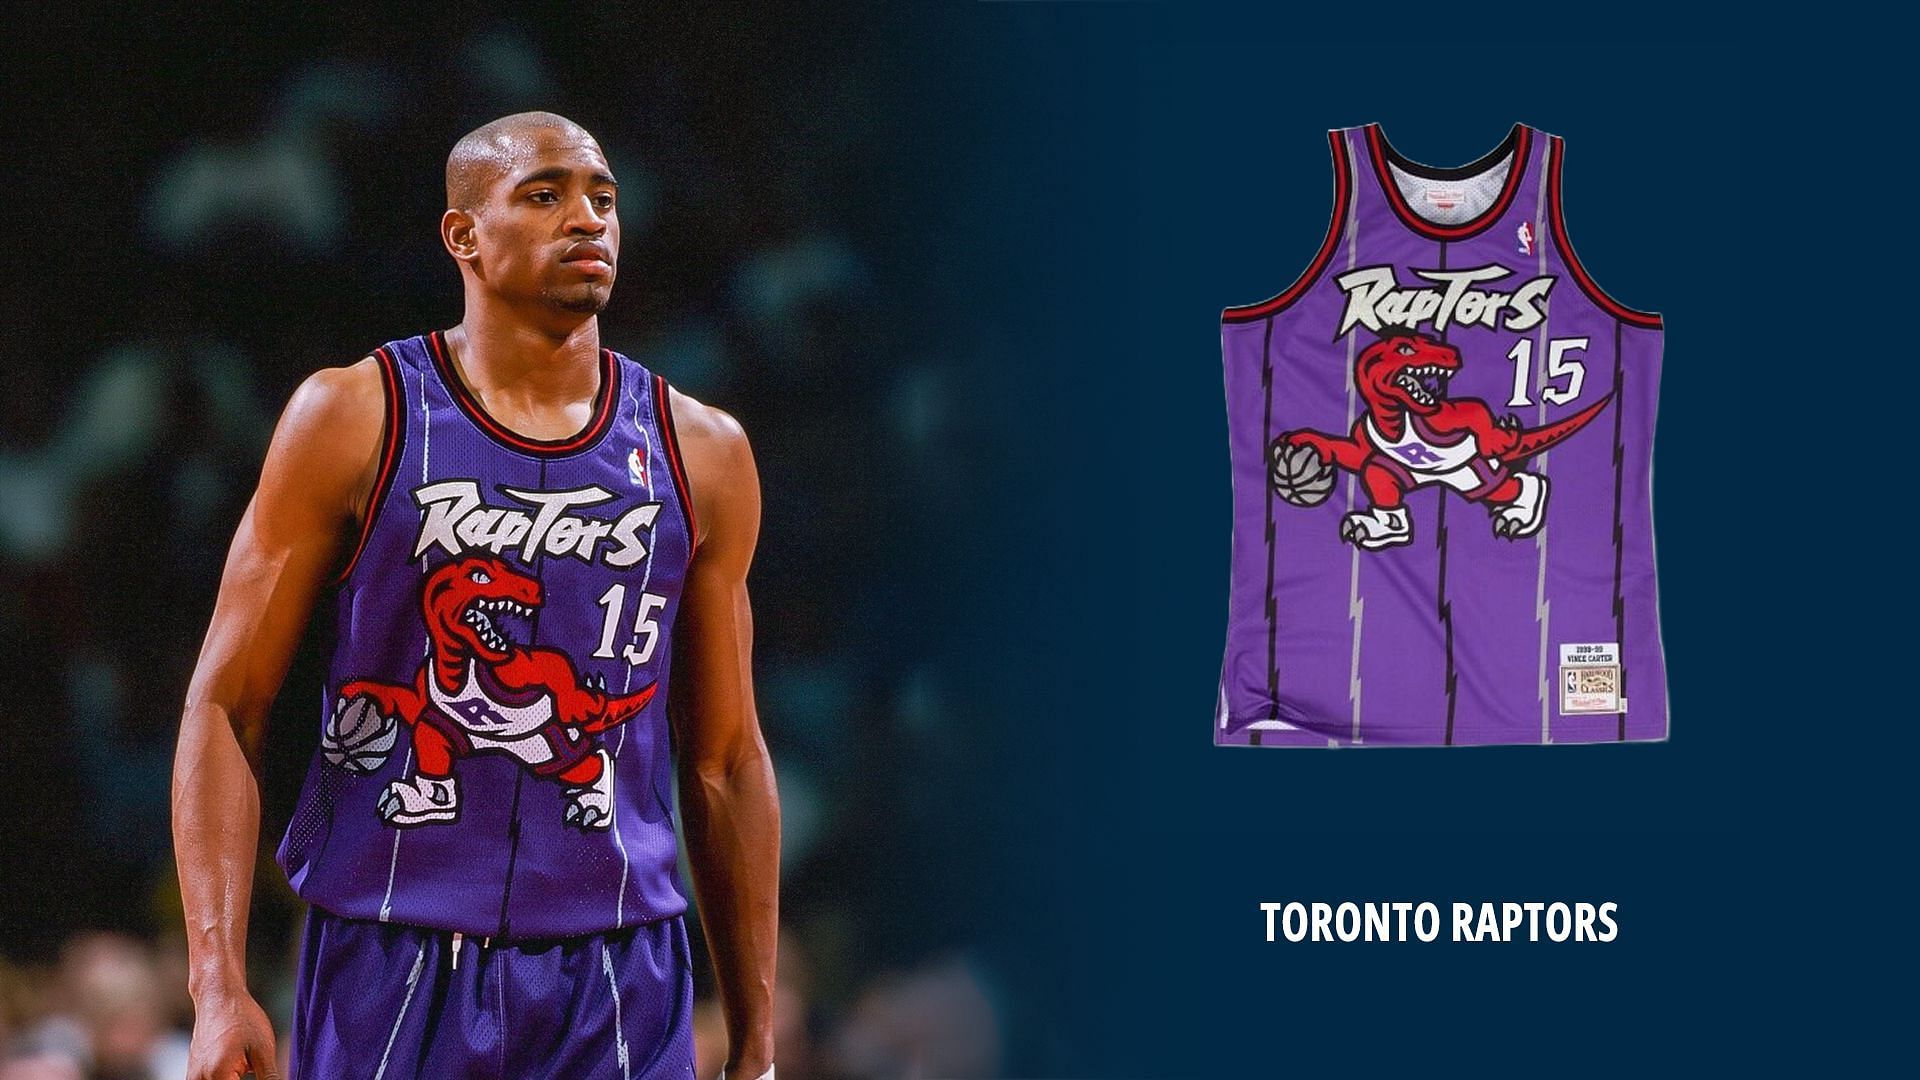 The 15 Ugliest NBA Jerseys in 2019-20, Ranked By Basketball Fans